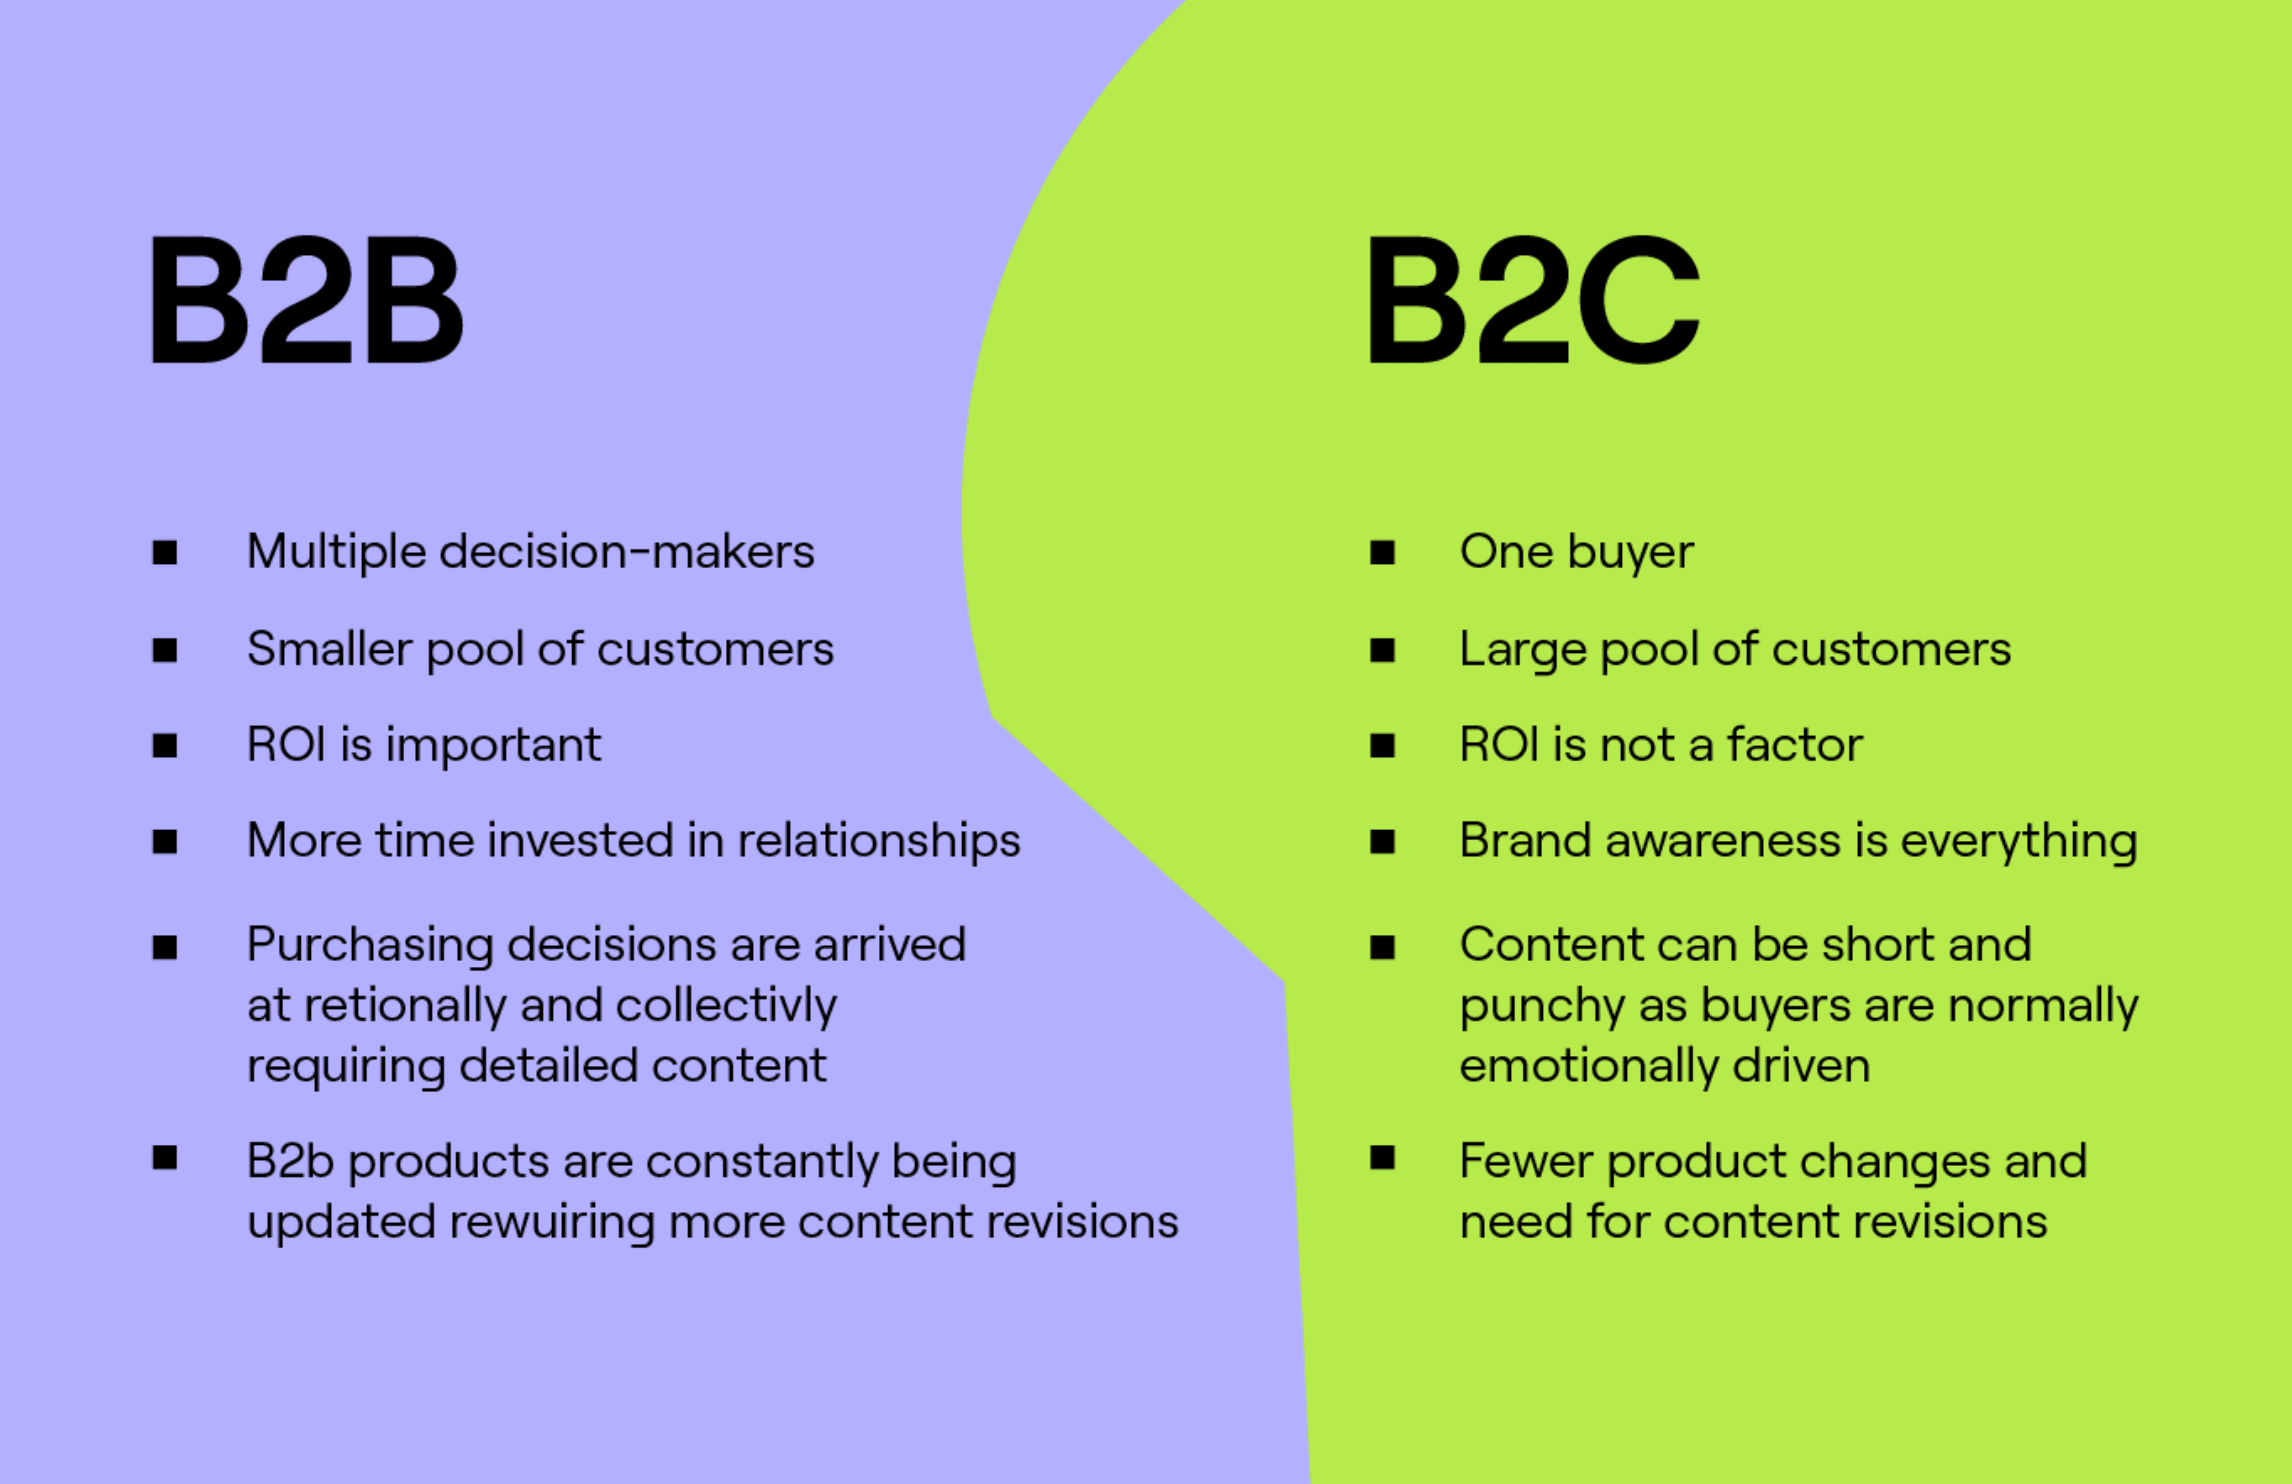 infographic shows the key differences between B2B and B2C companies